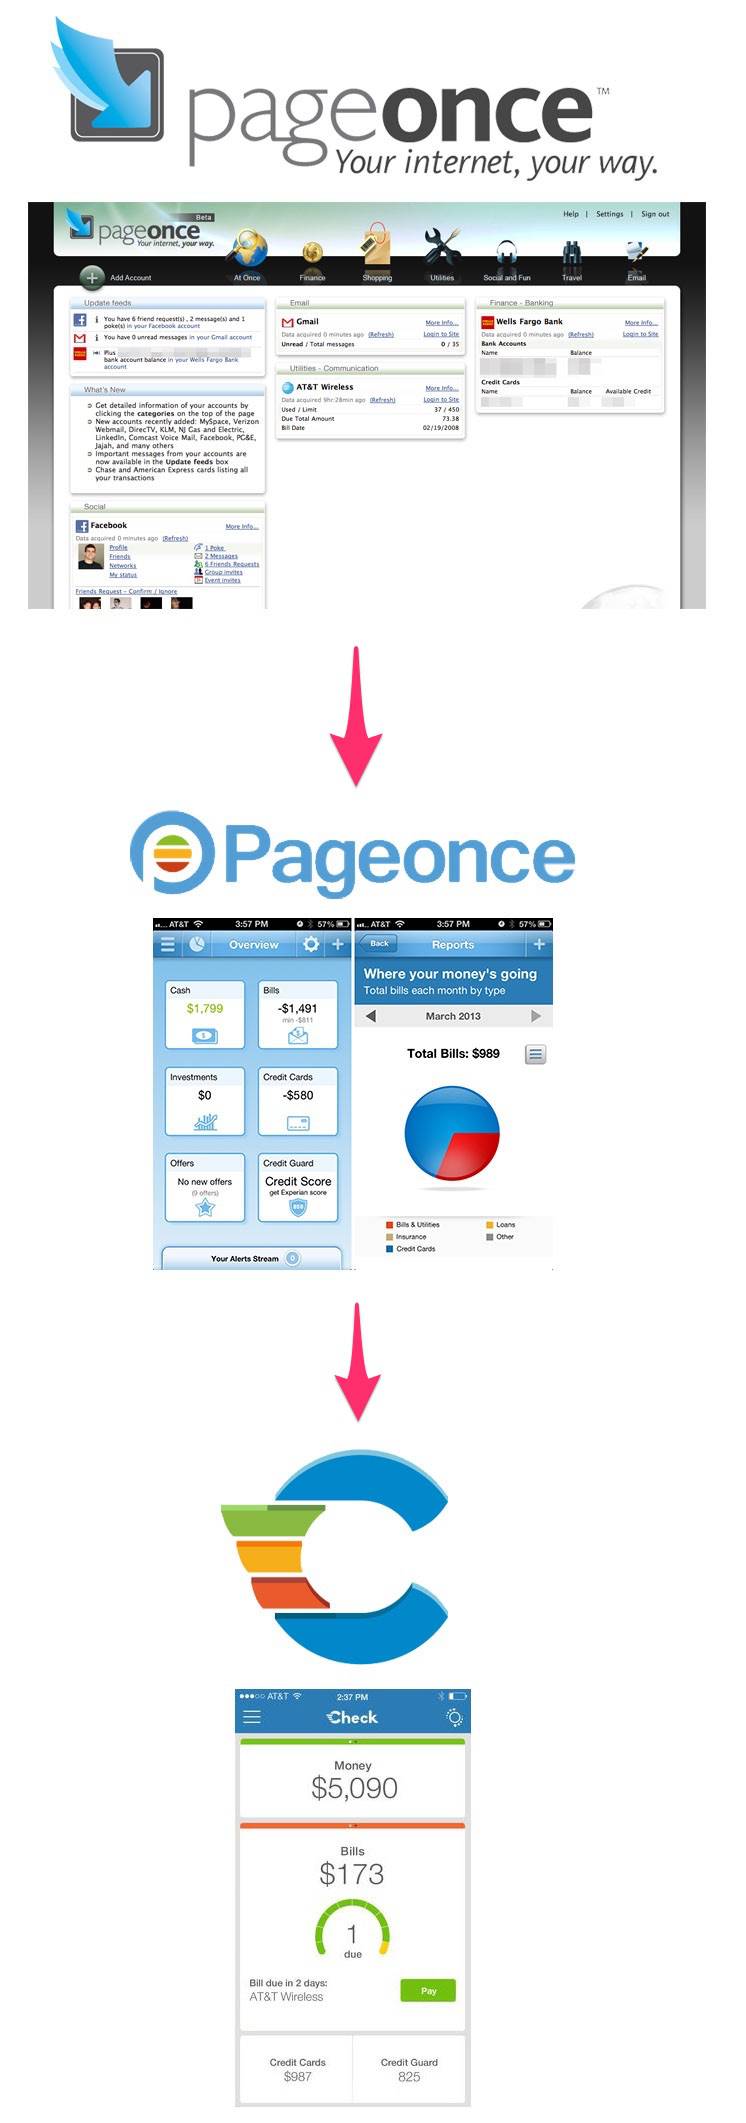 An image showing pageonce's original dashboard, which contained a number of personal finance tools, in comparison to its newer mobile interface, which features mobile bill pay.